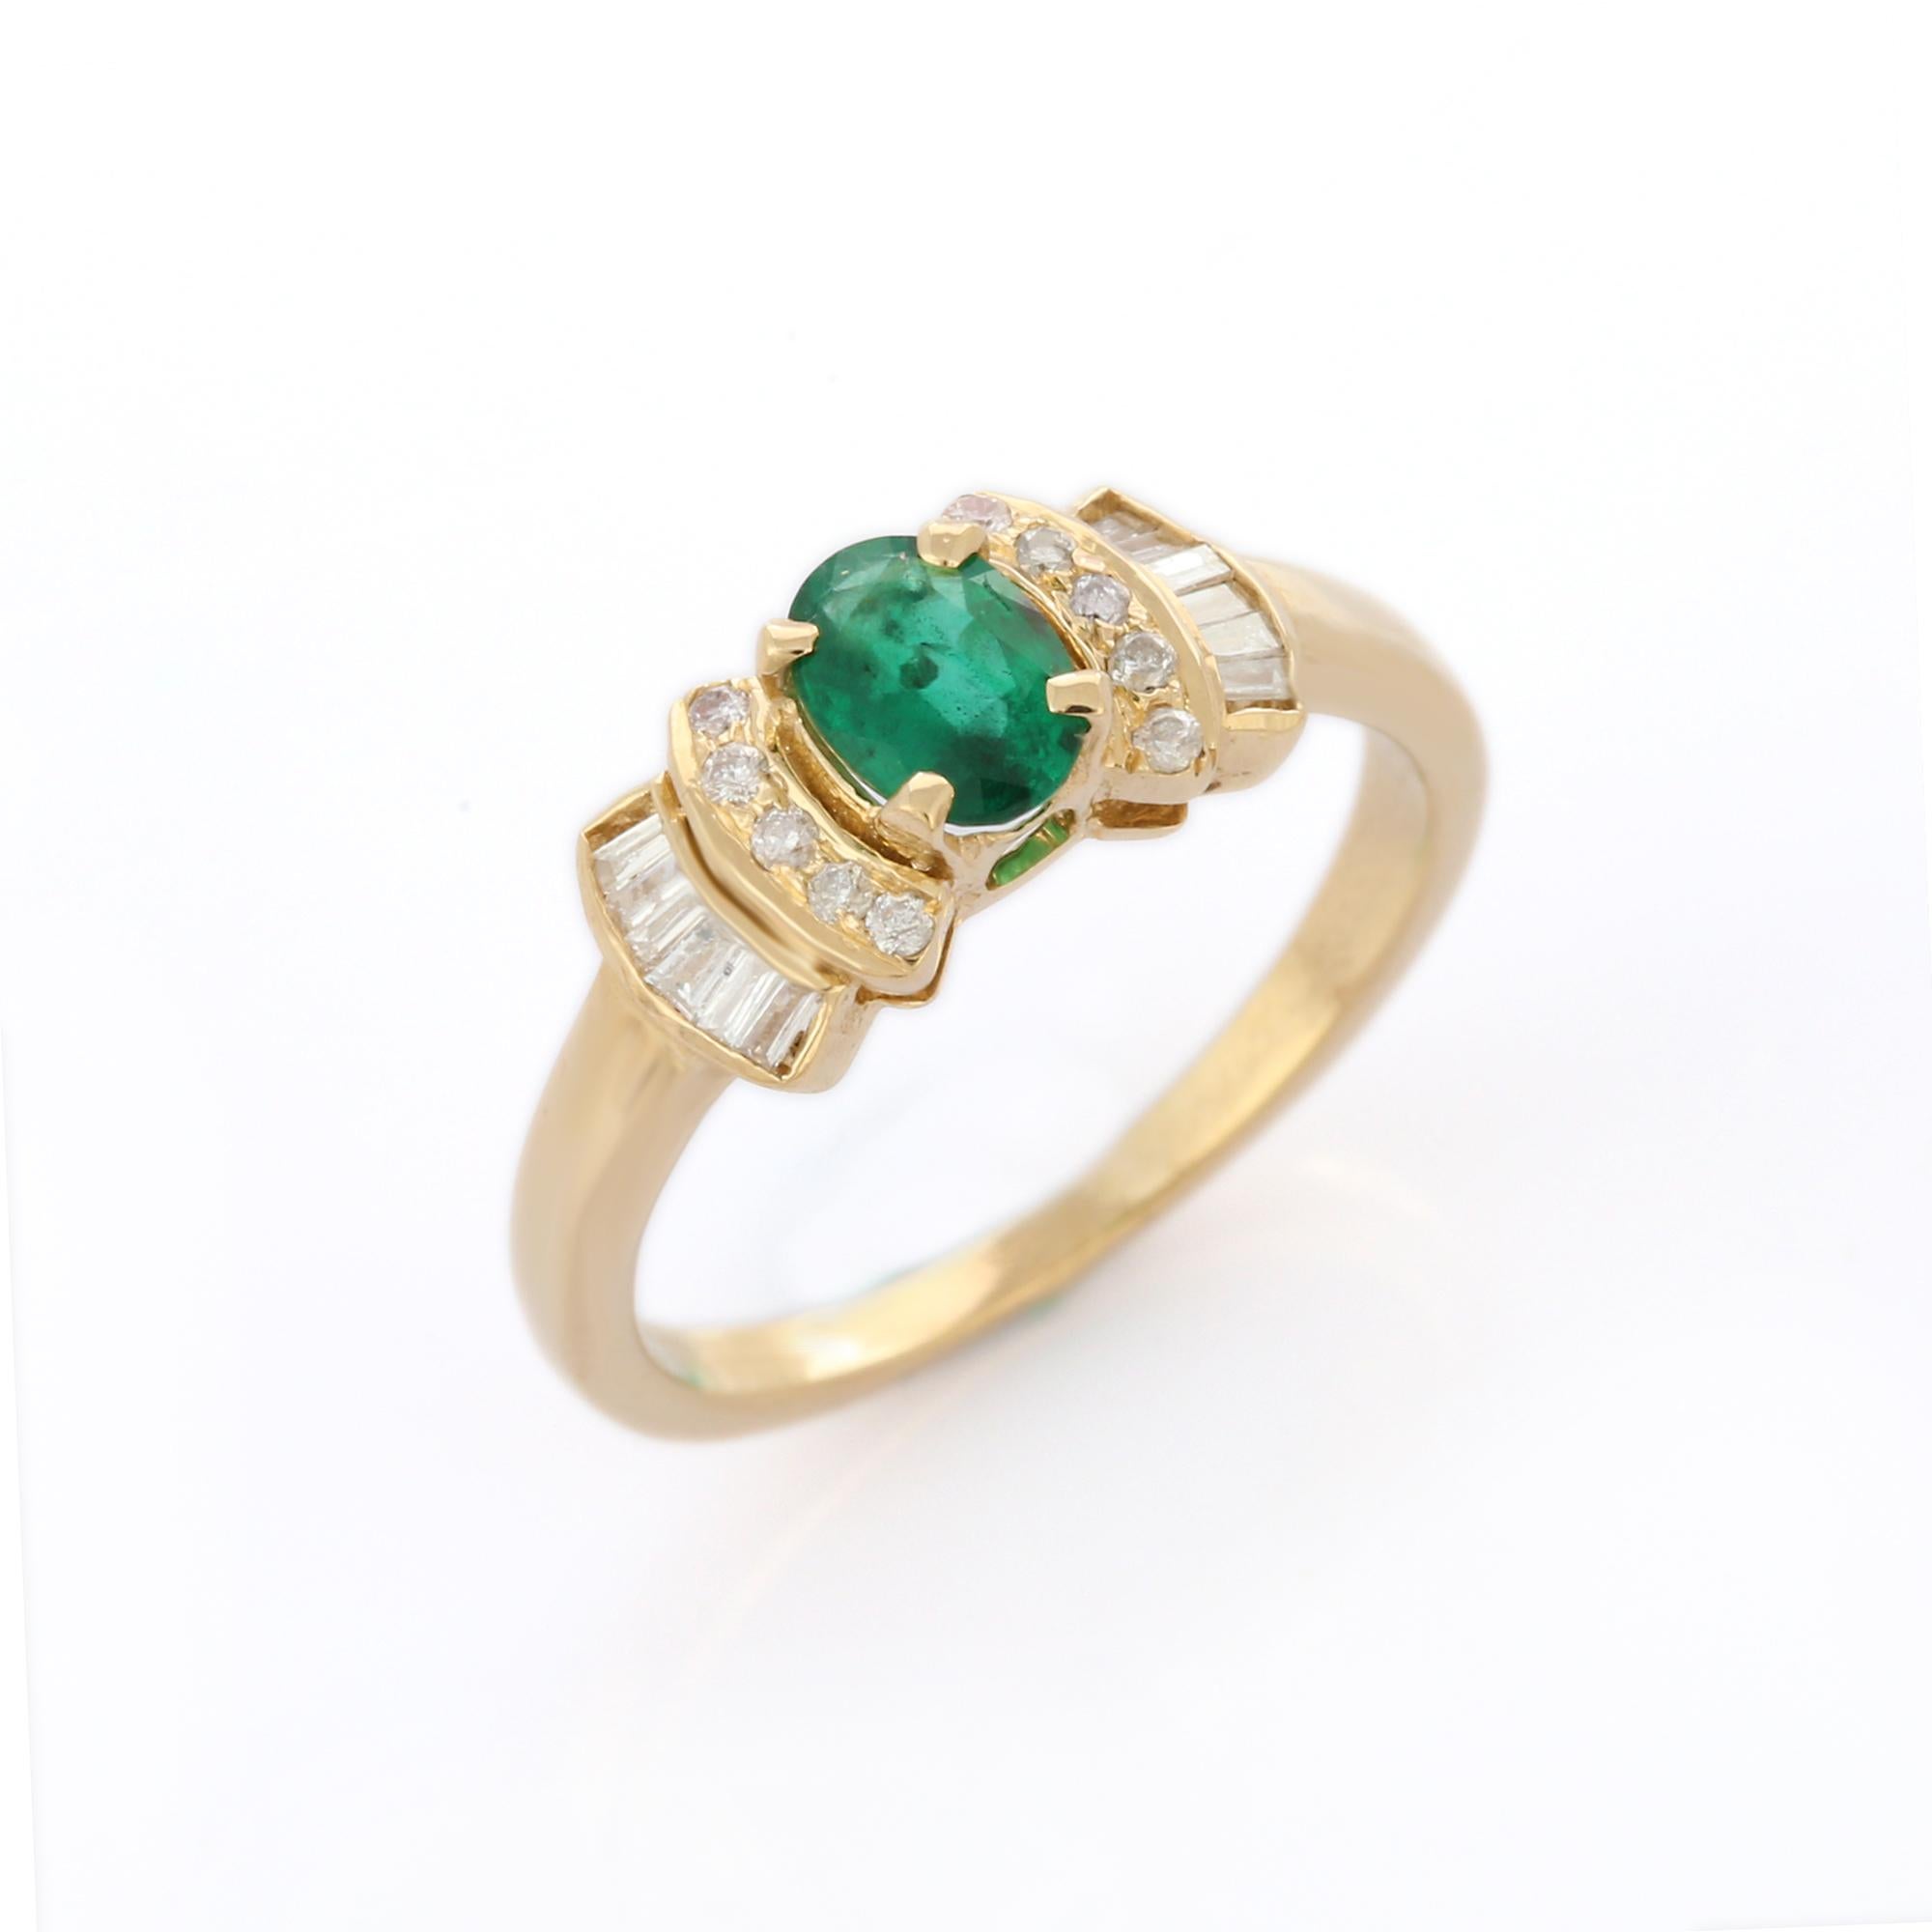 For Sale:  Vivid Green Emerald and Diamond Engagement Ring in 14K Yellow Gold for Her  2